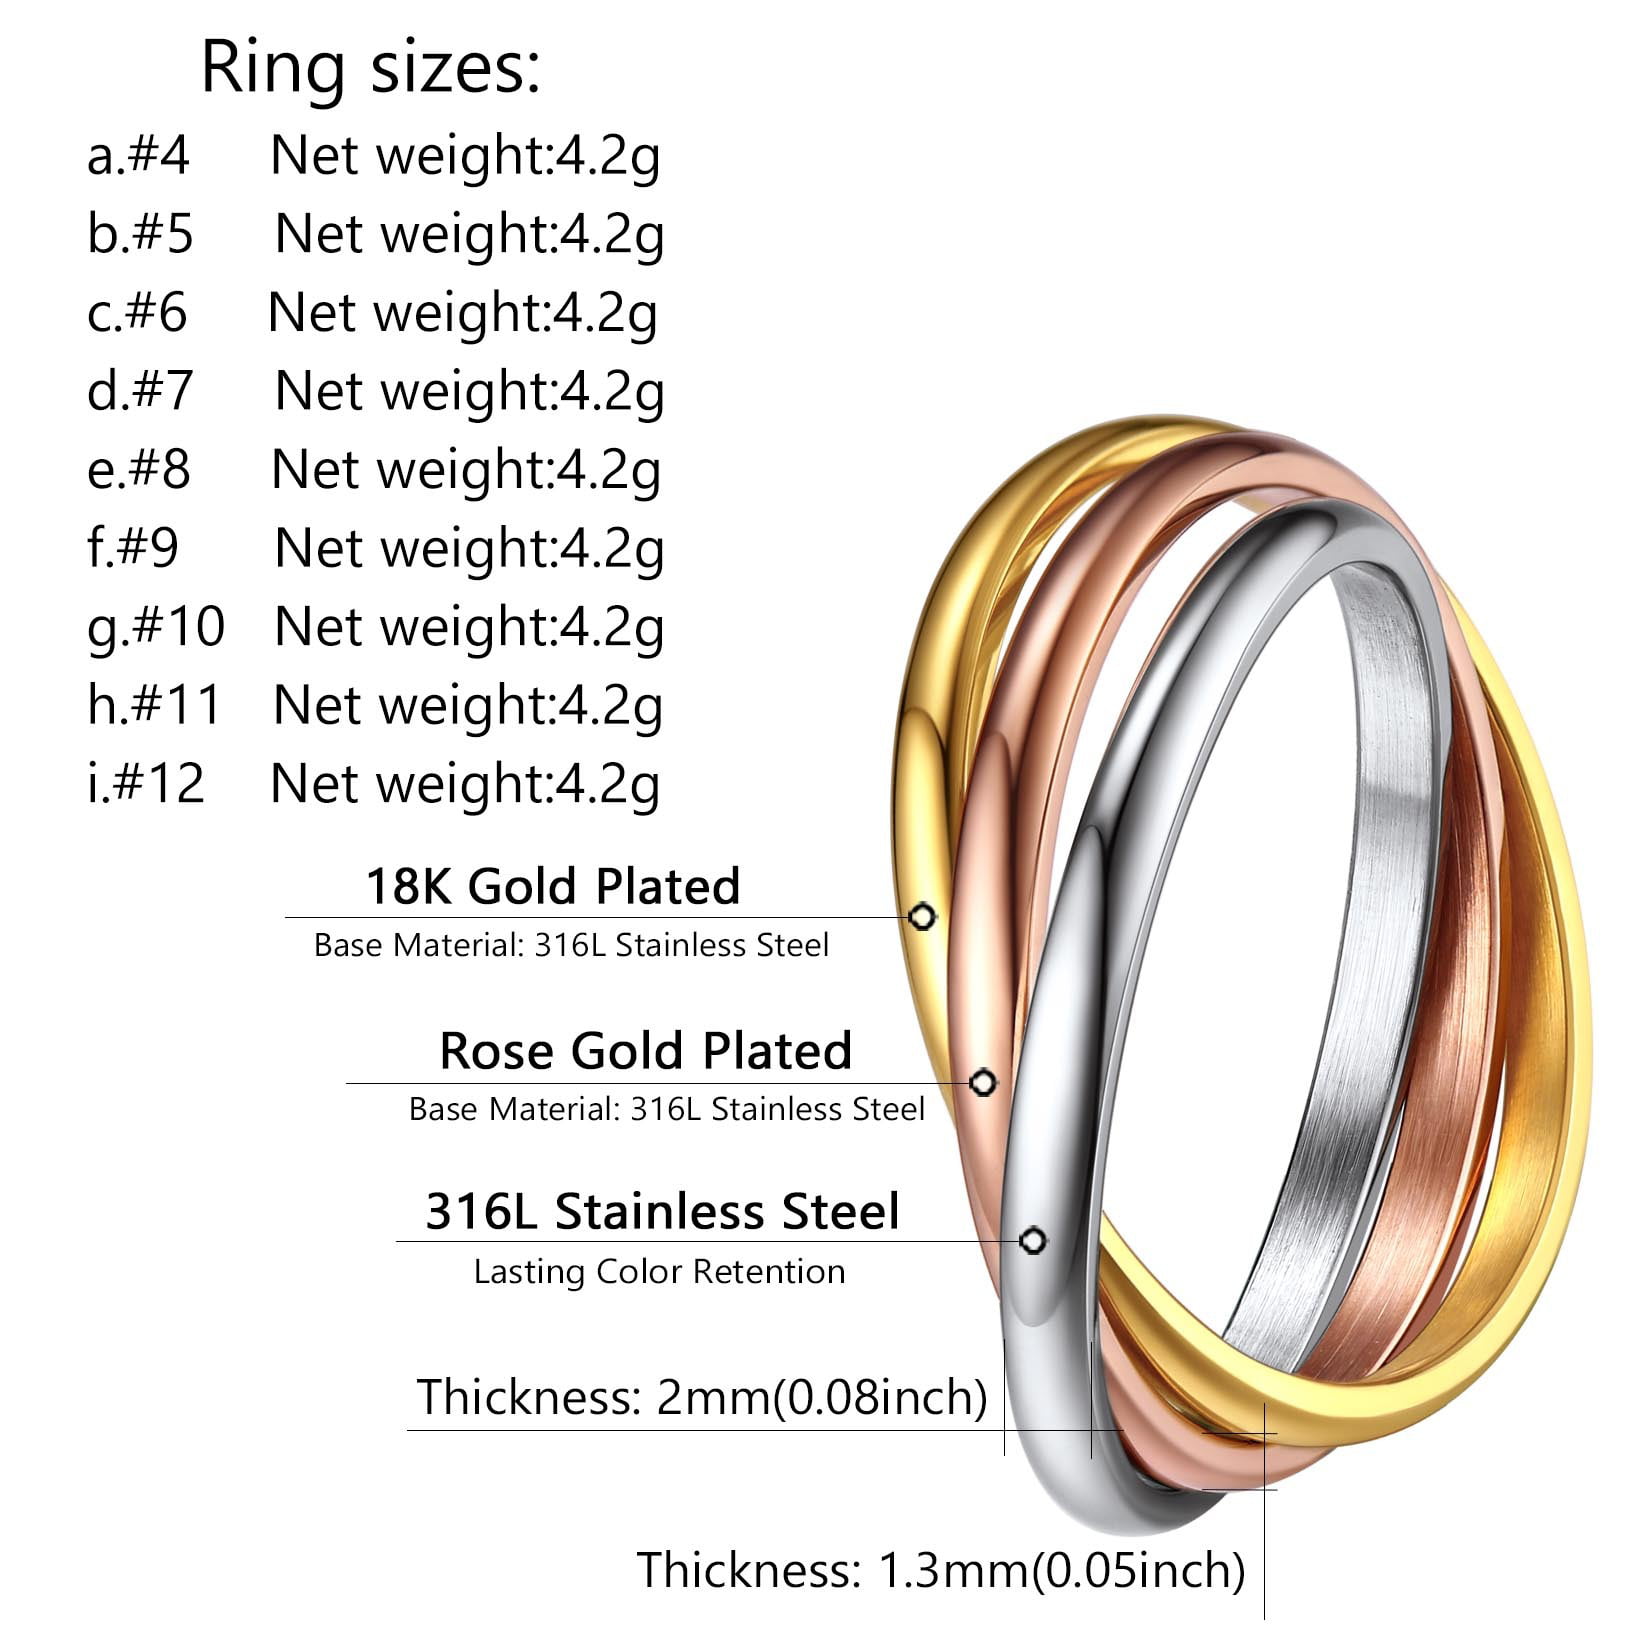 Ring Sizes in mm